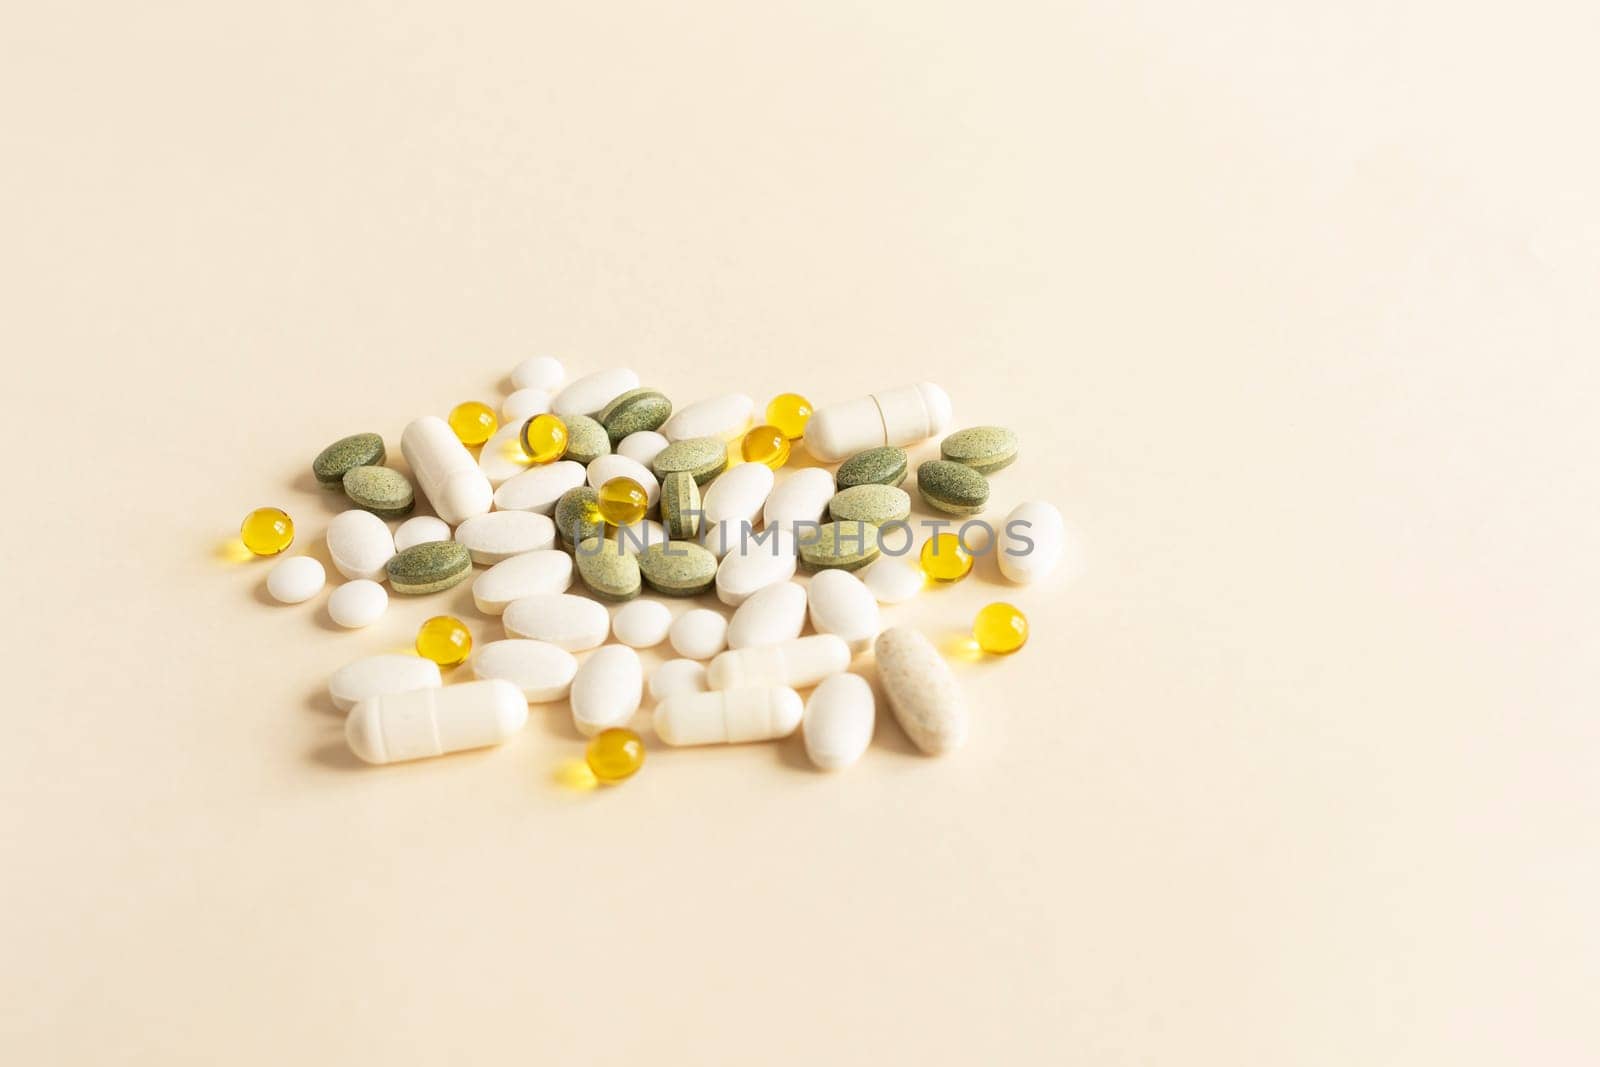 Assorted Pile of Colorful Pills, Green White Yellow, Beige Tablets, Capsules, Medical Supplement on Beige Background. Pharmaceutical concept. Copy Space For Text. Horizontal Plane by netatsi